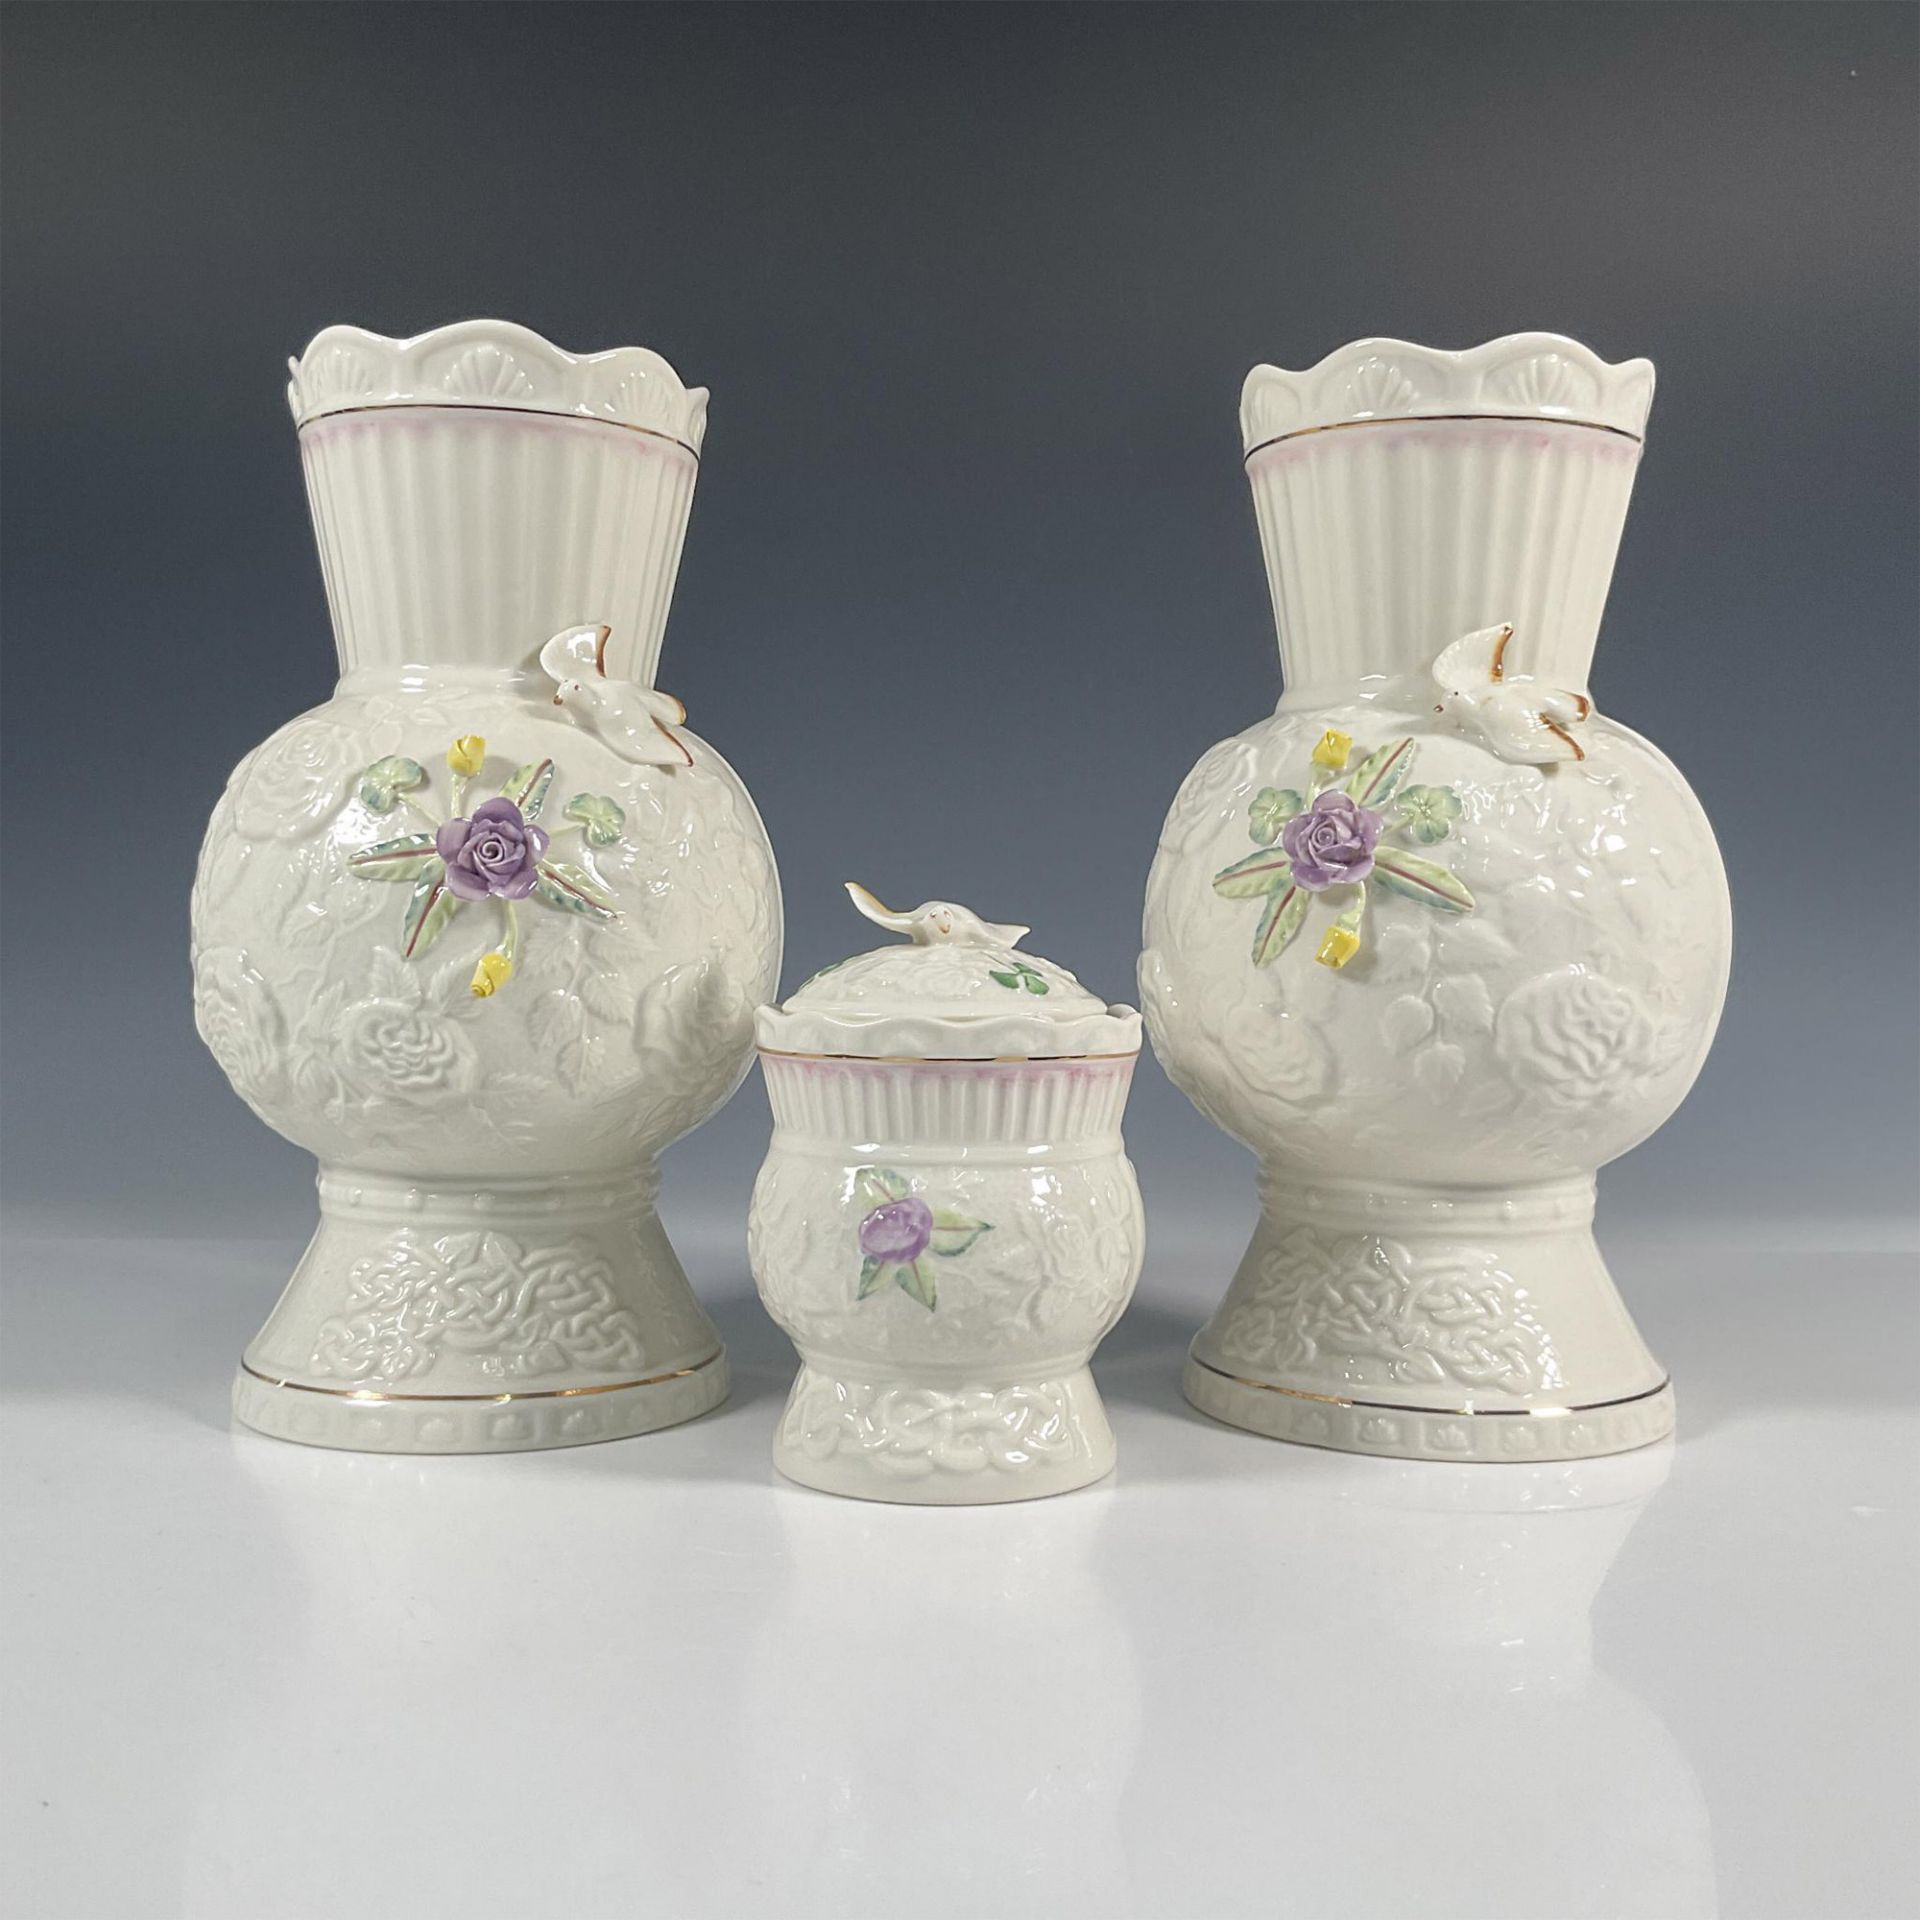 3pc Belleek Pottery Vases and Lidded Box, Song Bird - Image 2 of 5